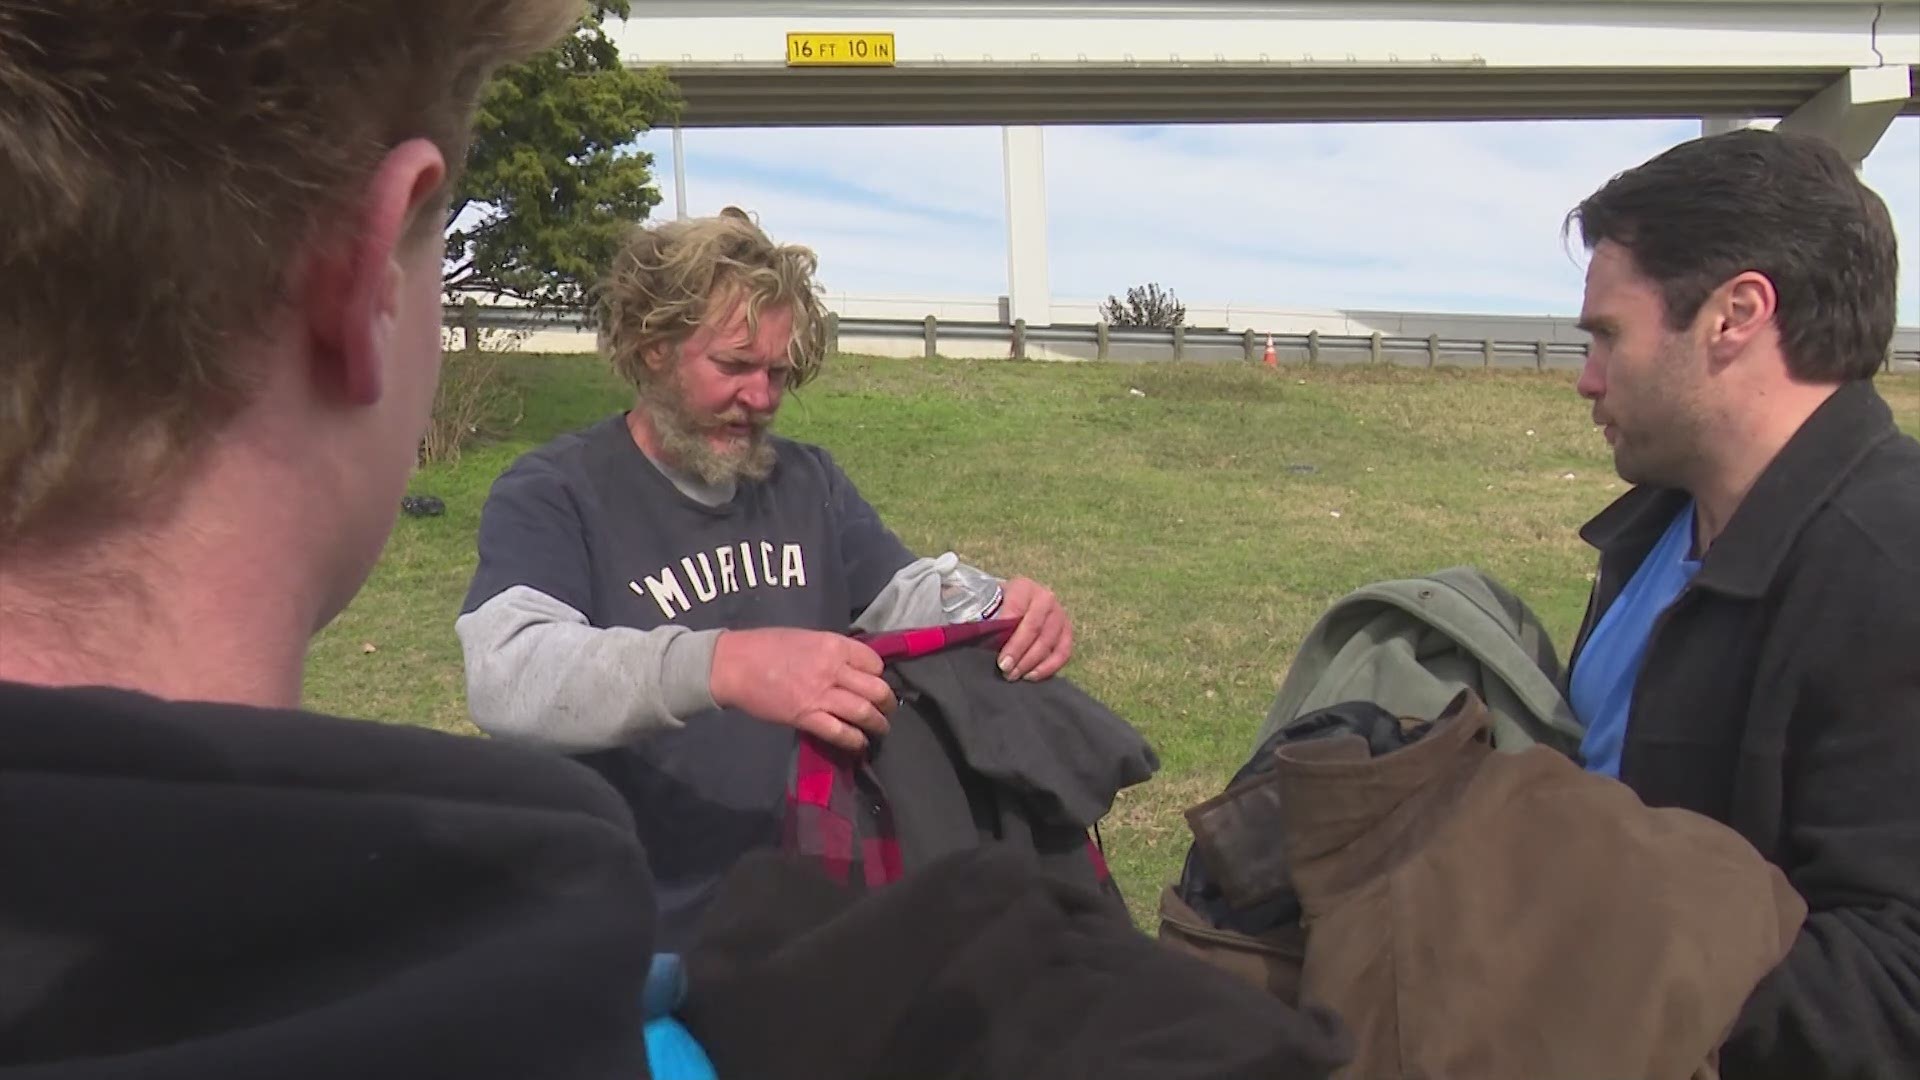 Michael Seymour has always felt called to help the homeless. He has decided to do so this year by collecting 300 for those living on the streets in Fort Worth.